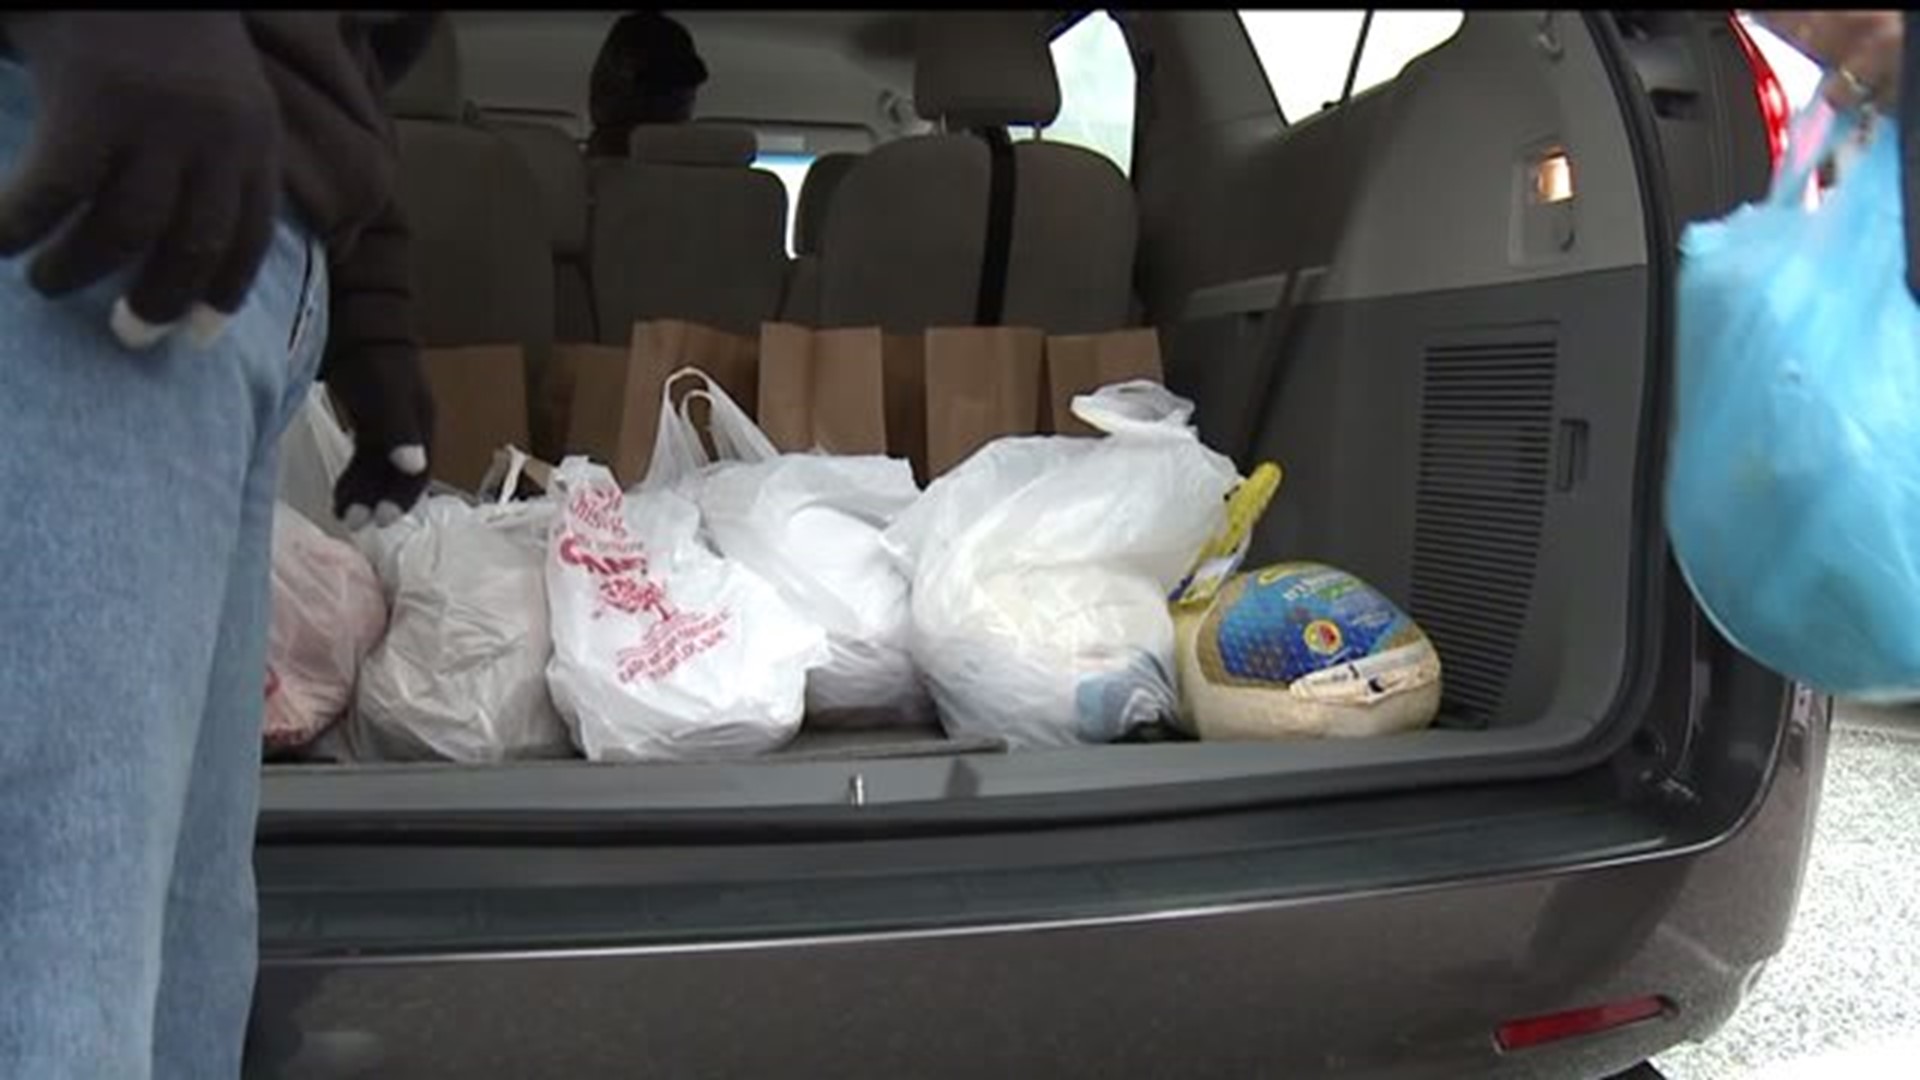 Pantry helps feed hundreds of families in York County